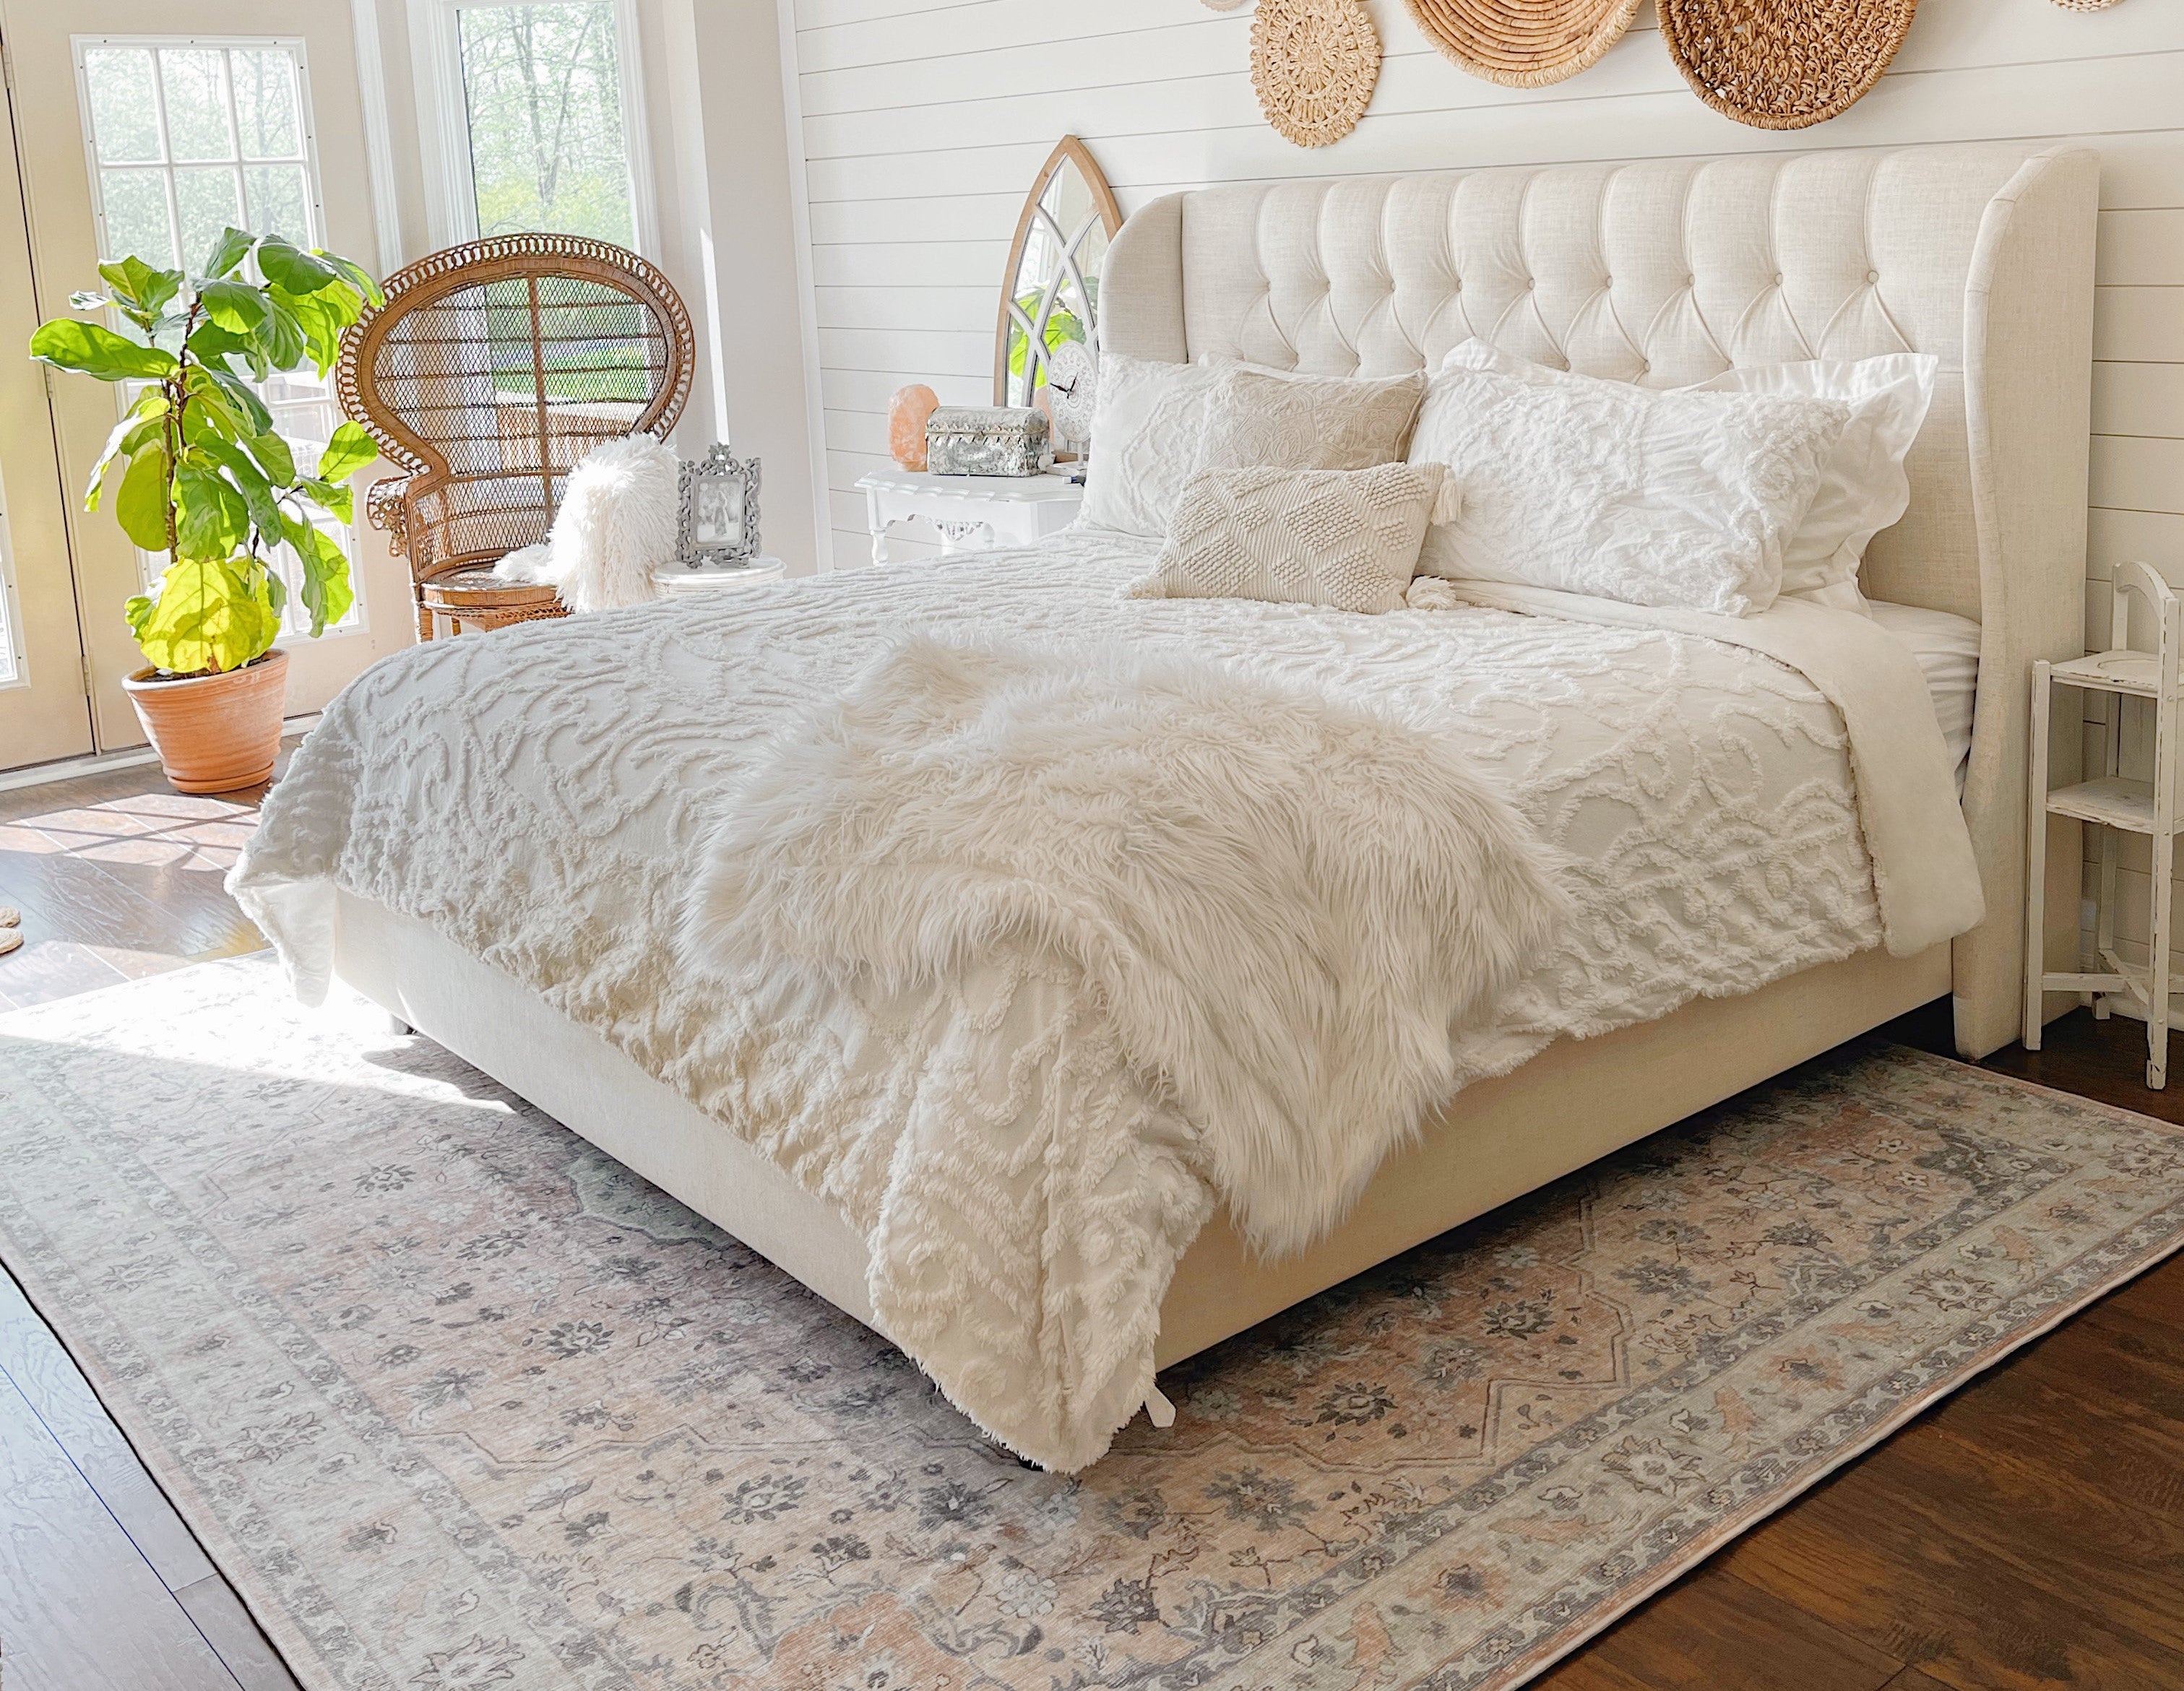 Style Carpets & Beds